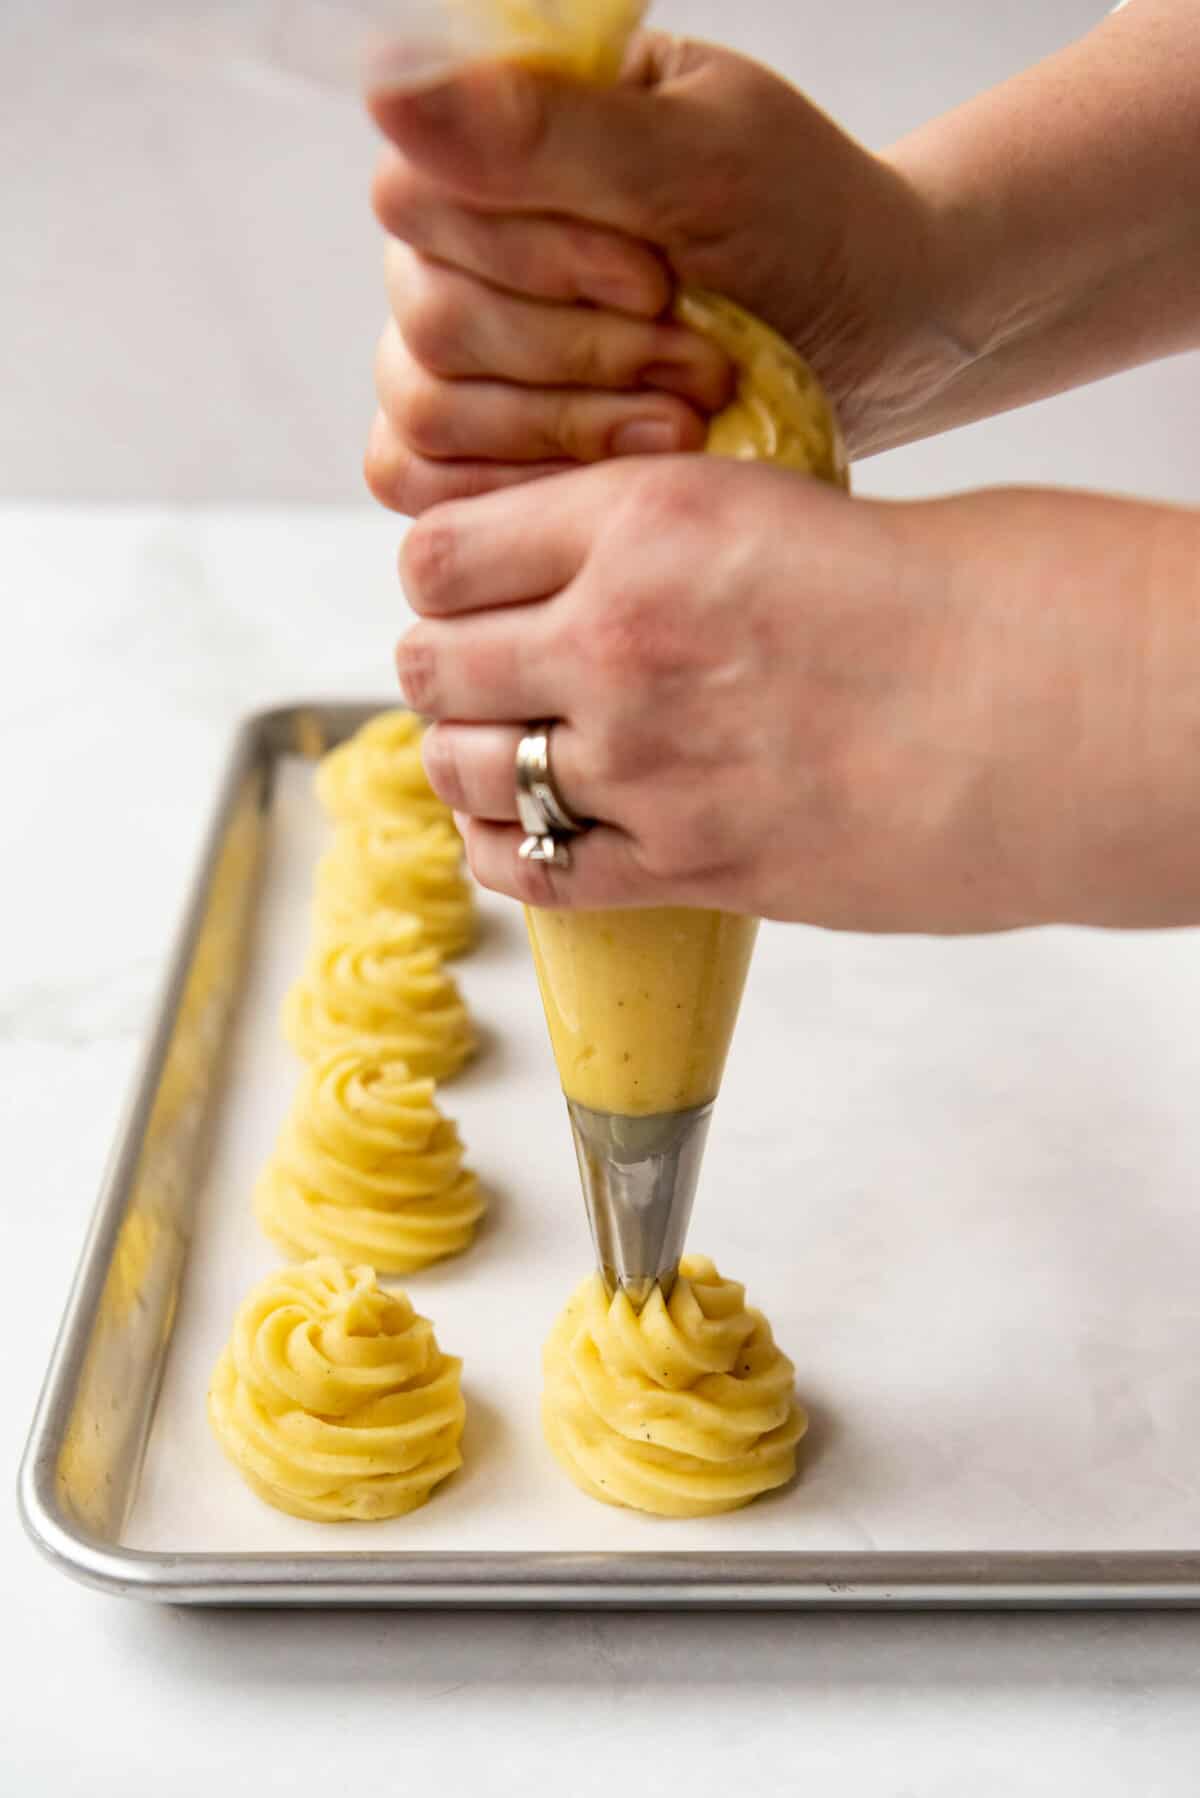 Hands holding a piping bag fitted with a star tip piping mashed potatoes into swirled mounds on a baking sheet lined with parchment paper.